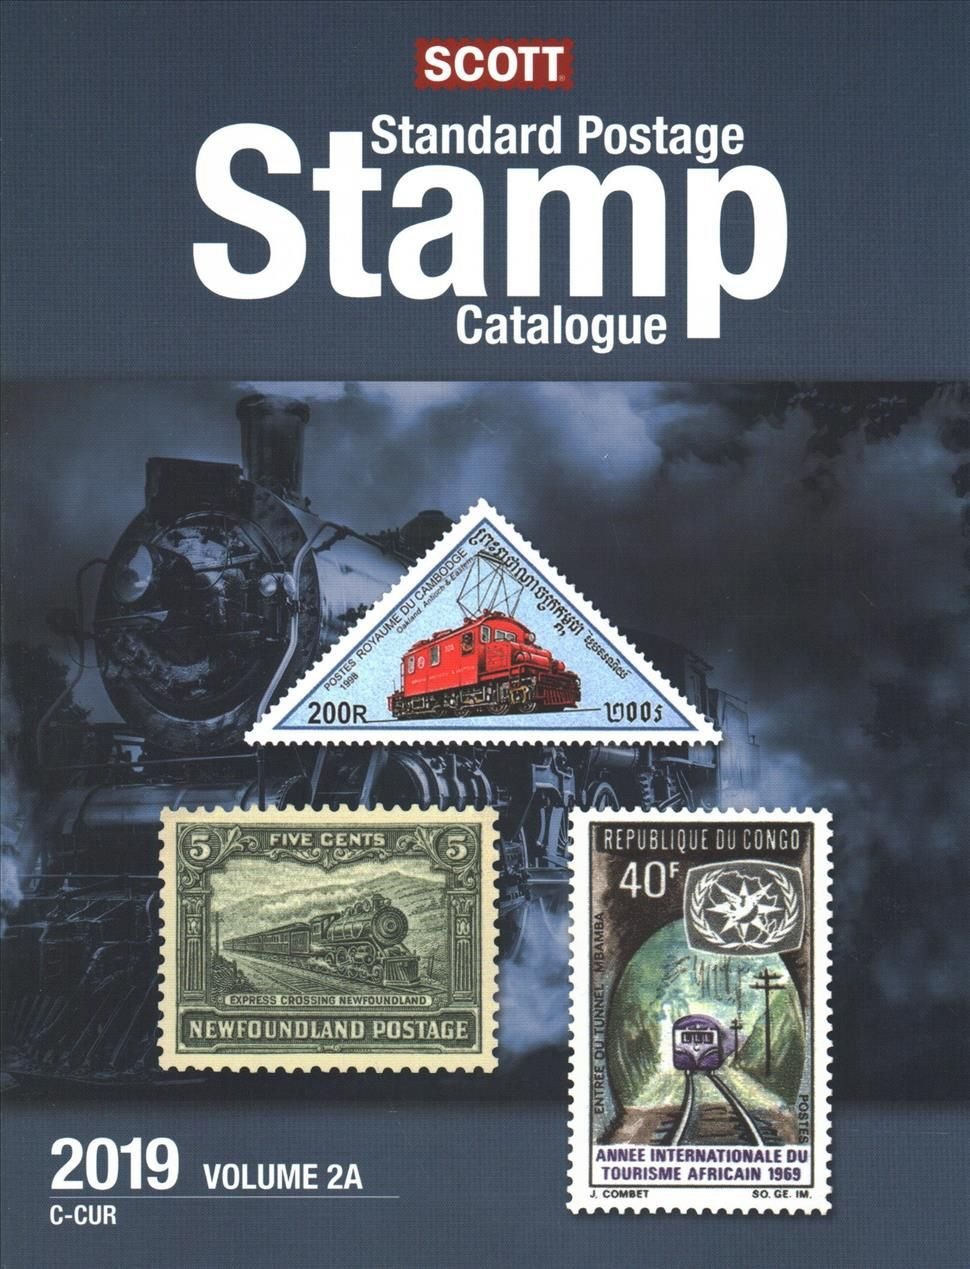 Scott Standard Postage Stamp Catalogue 2022: Us and Countries AB (Scott  Standard Postage Stamp Catalogue Vol 1 US and Countries AB)